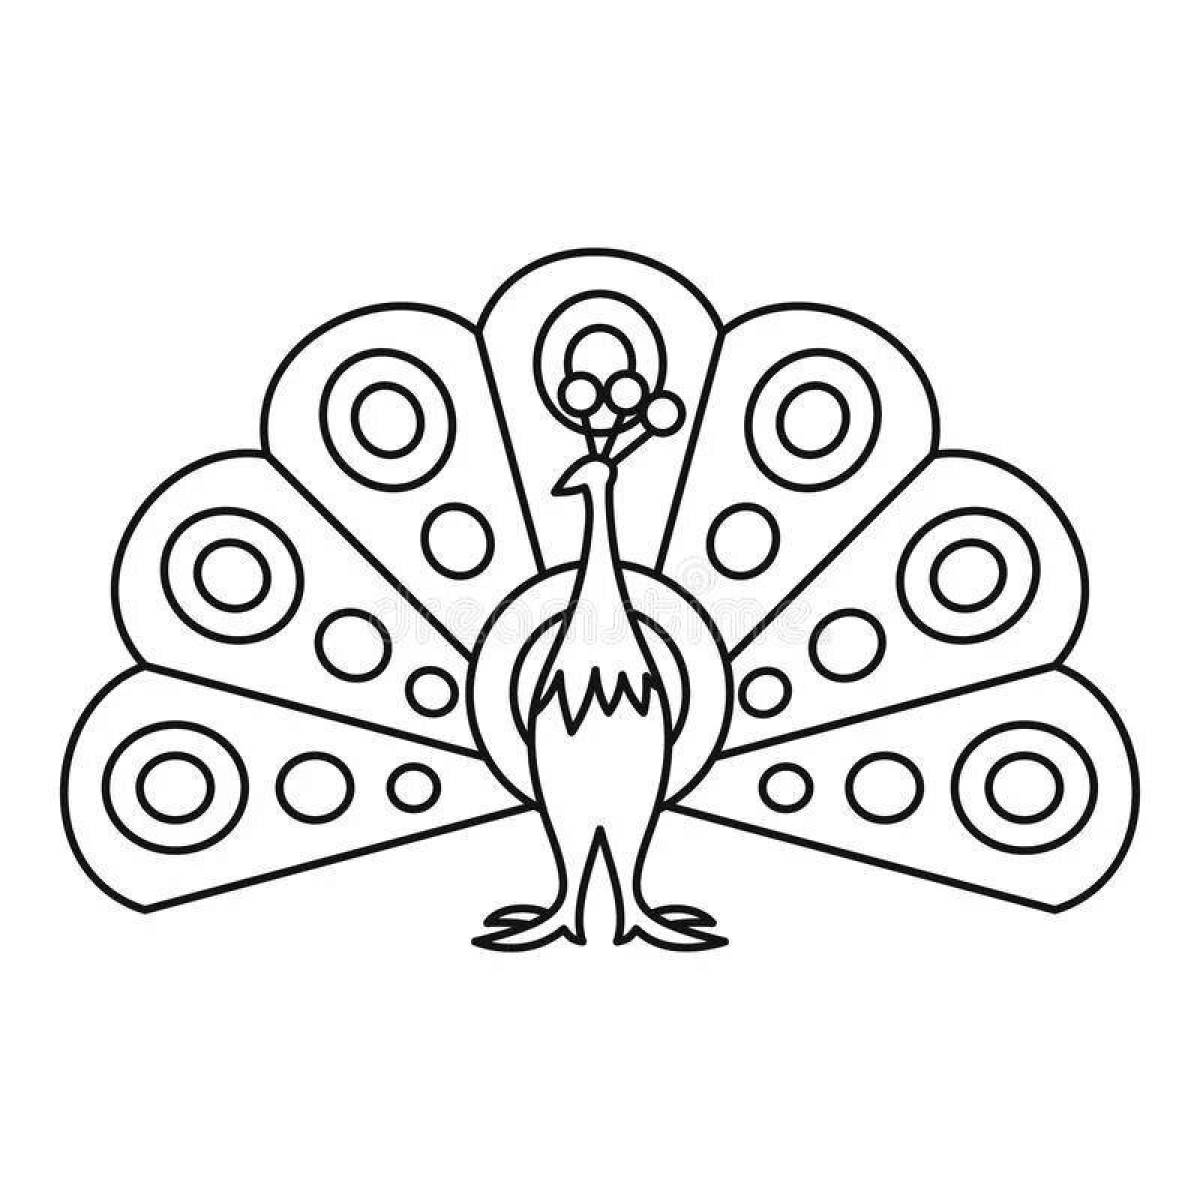 Colorful coloring of the peacock mascot